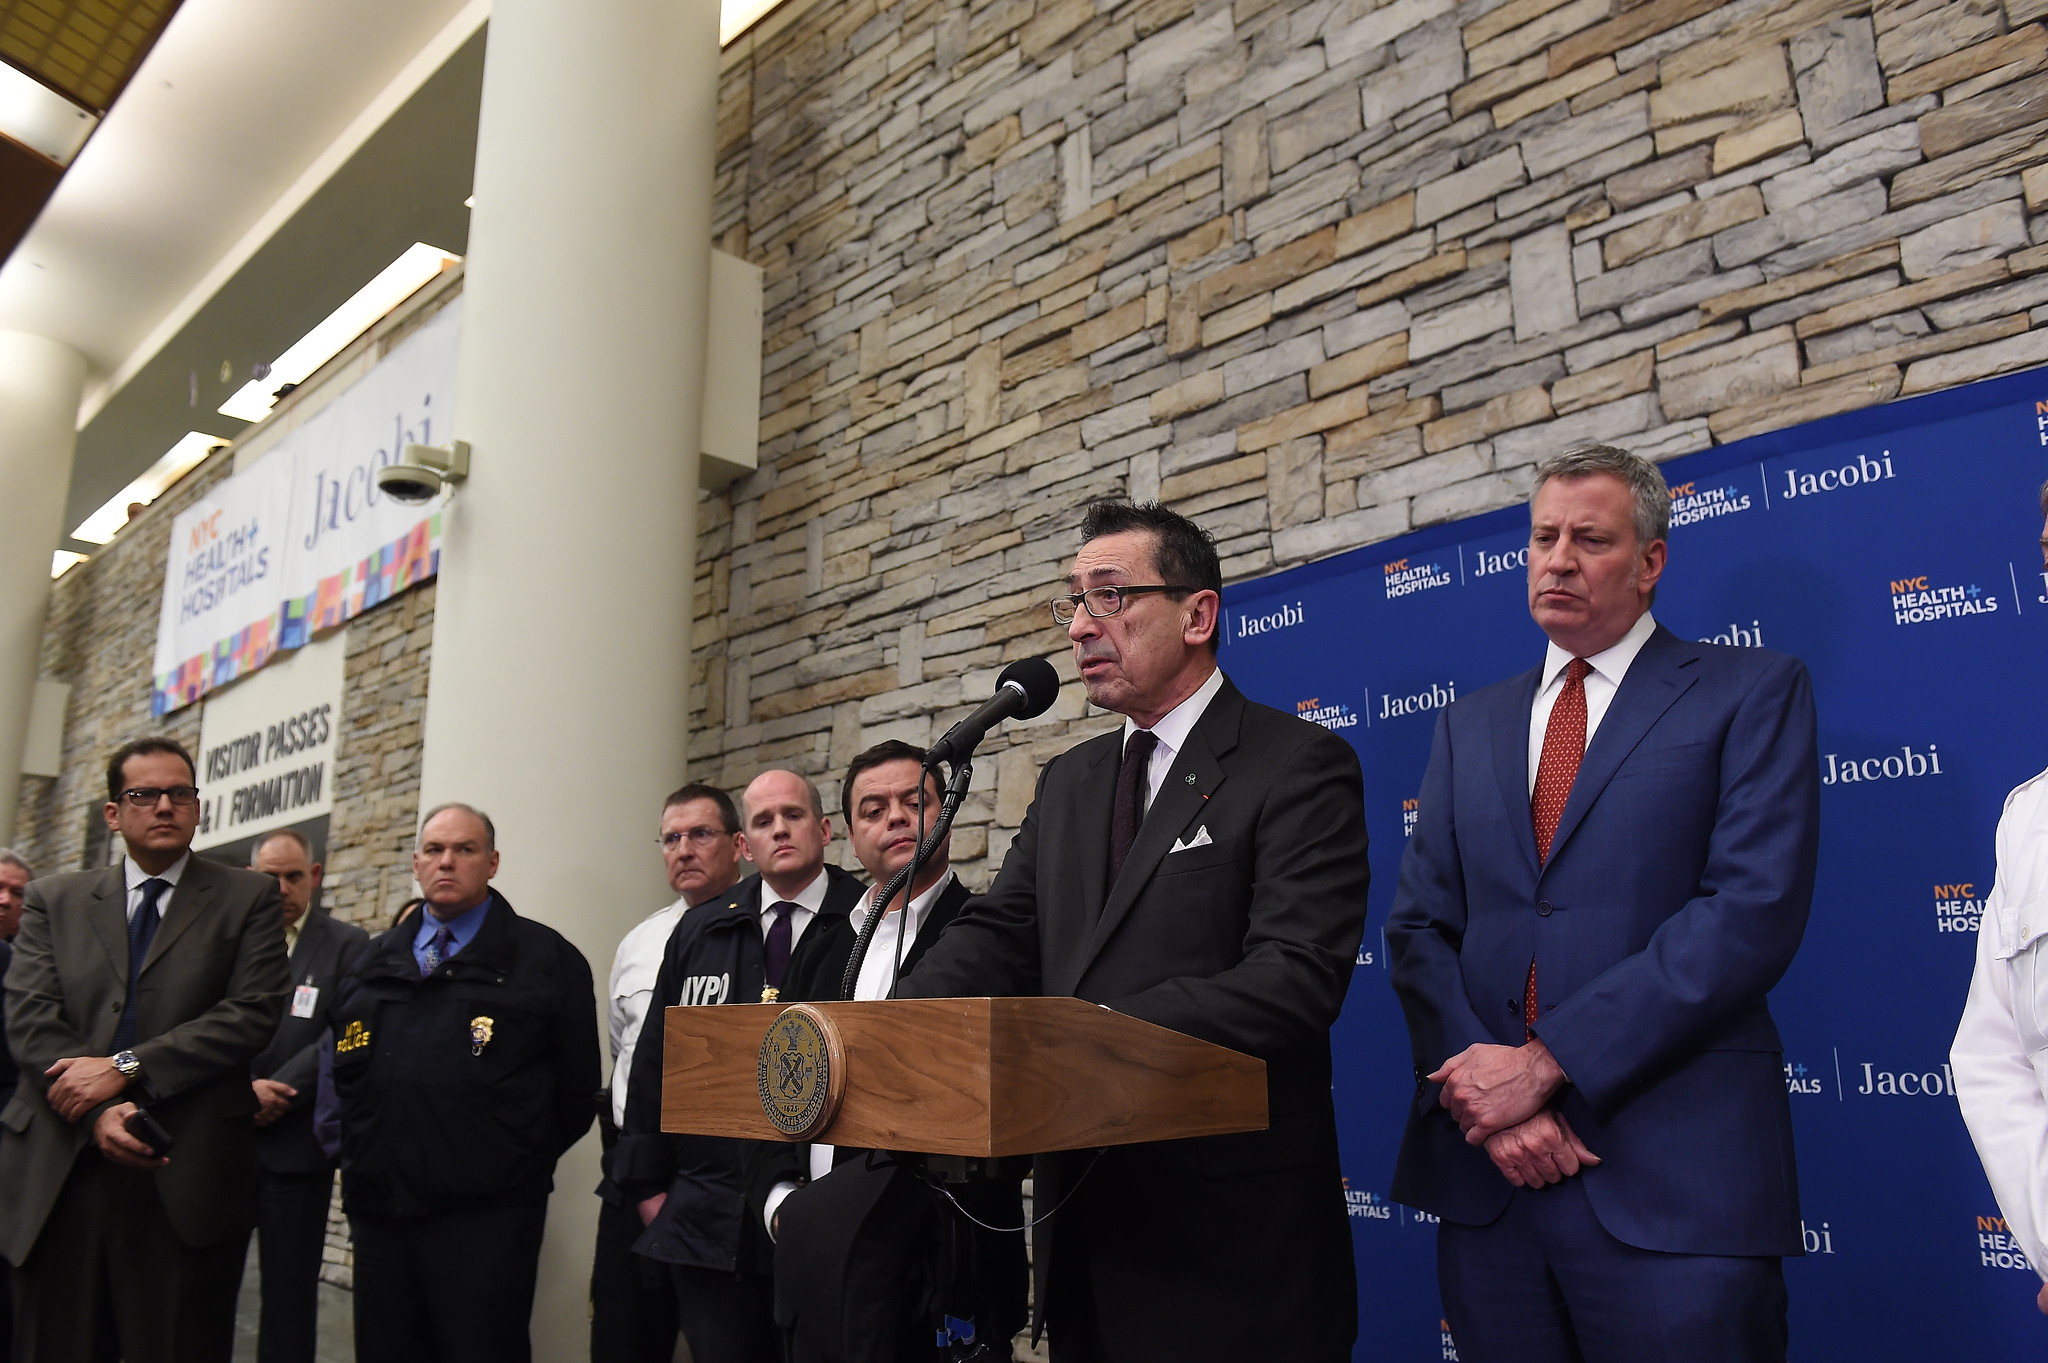 Mayor Bill de Blasio hosts a press conference with New York City Fire Department Commissioner Daniel Nigro at Jacobi Medical Center  where two FDNY EMTs were taken after they were injured while serving New York City in the Bronx on Thursday, March 16, 201